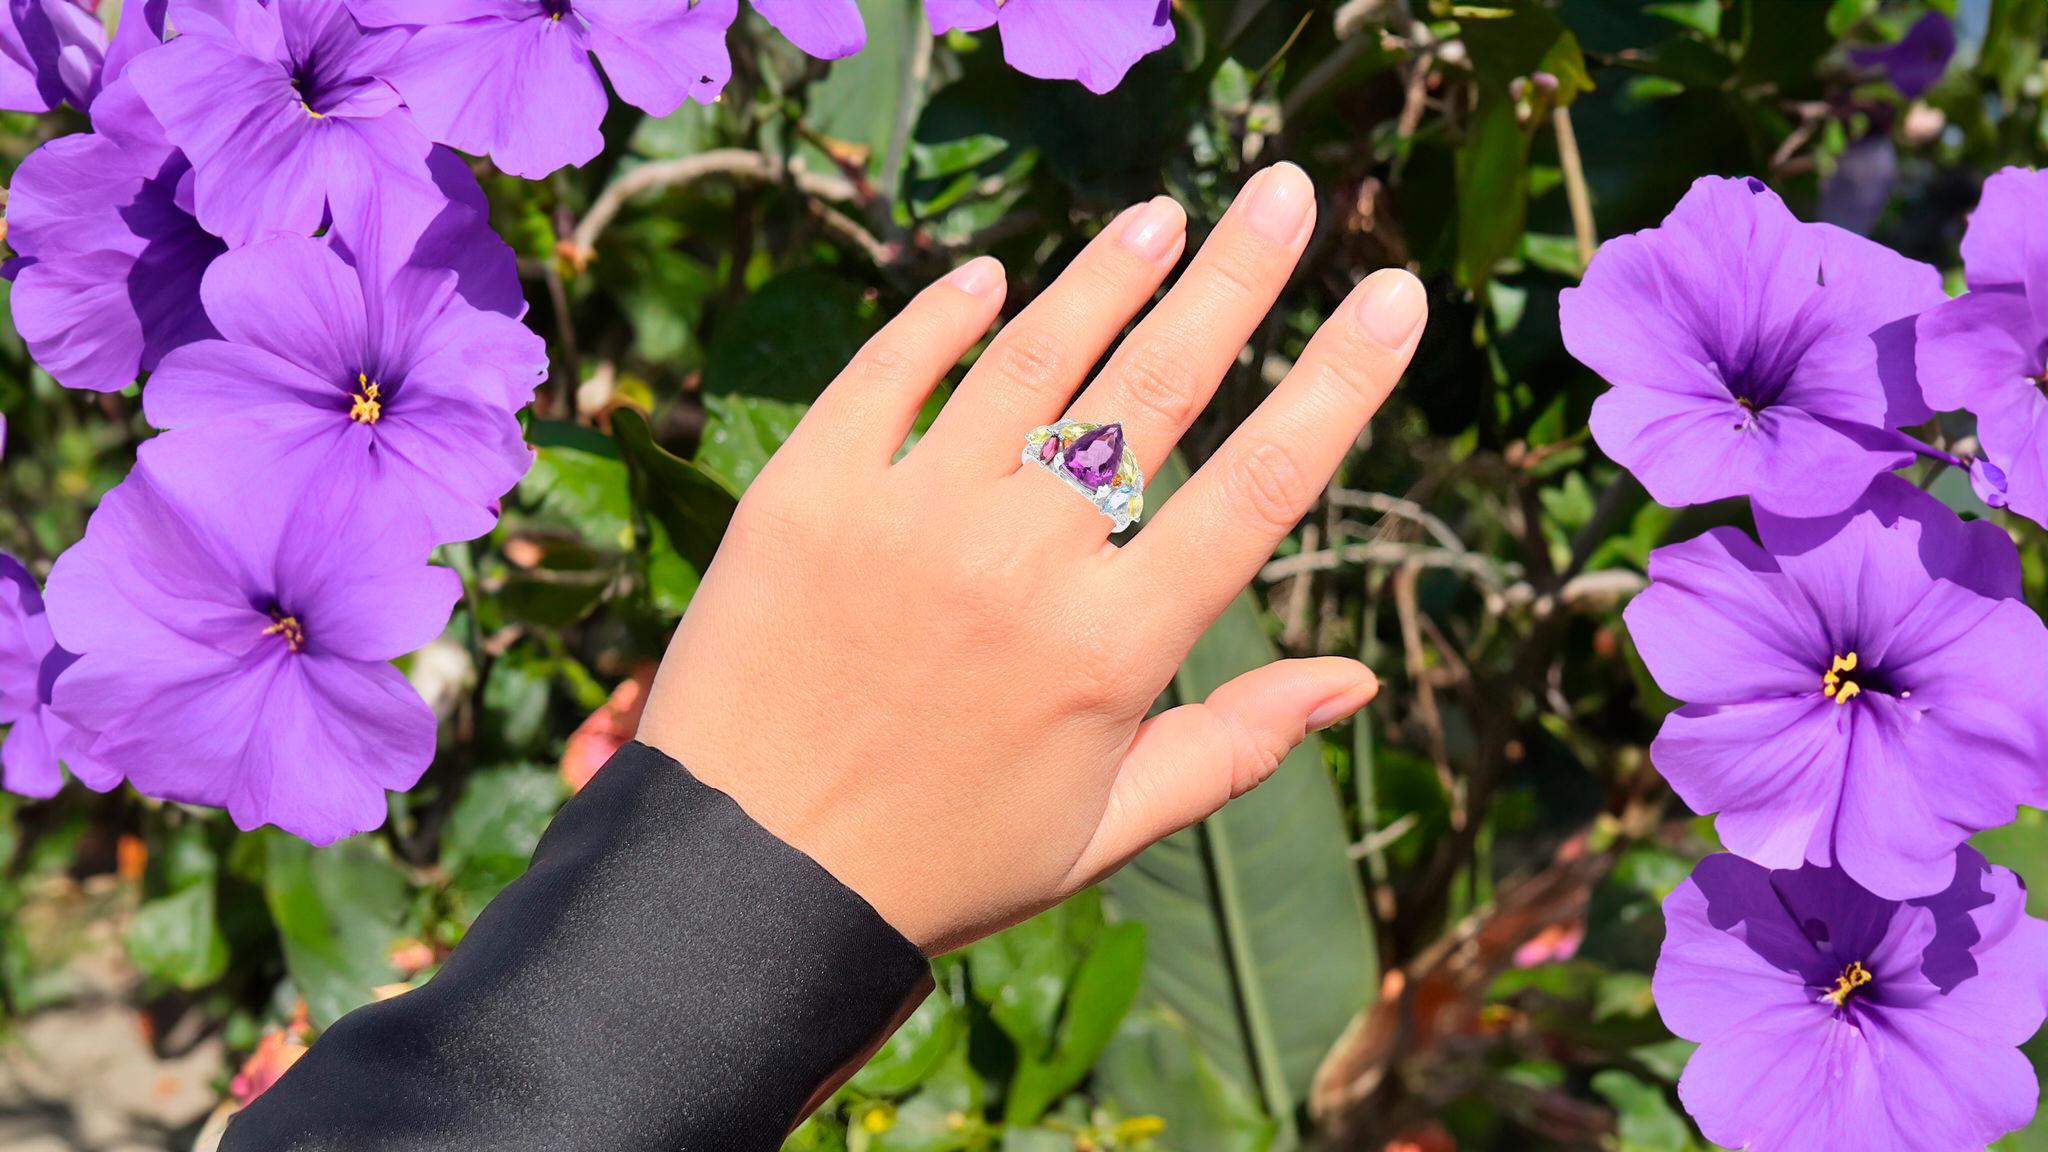 It comes with the Gemological Appraisal by GIA GG/AJP
Pear Cut Amethyst = 4.40 Carat
Rhodolite Garnet = 0.30 Carats
Lemon Quartz = 1.20 Carats
Blue & White Topaz = 0.50 Carats
Metal: Rhodium Plated Sterling Silver
Ring Size: 7* US
*It can be resized